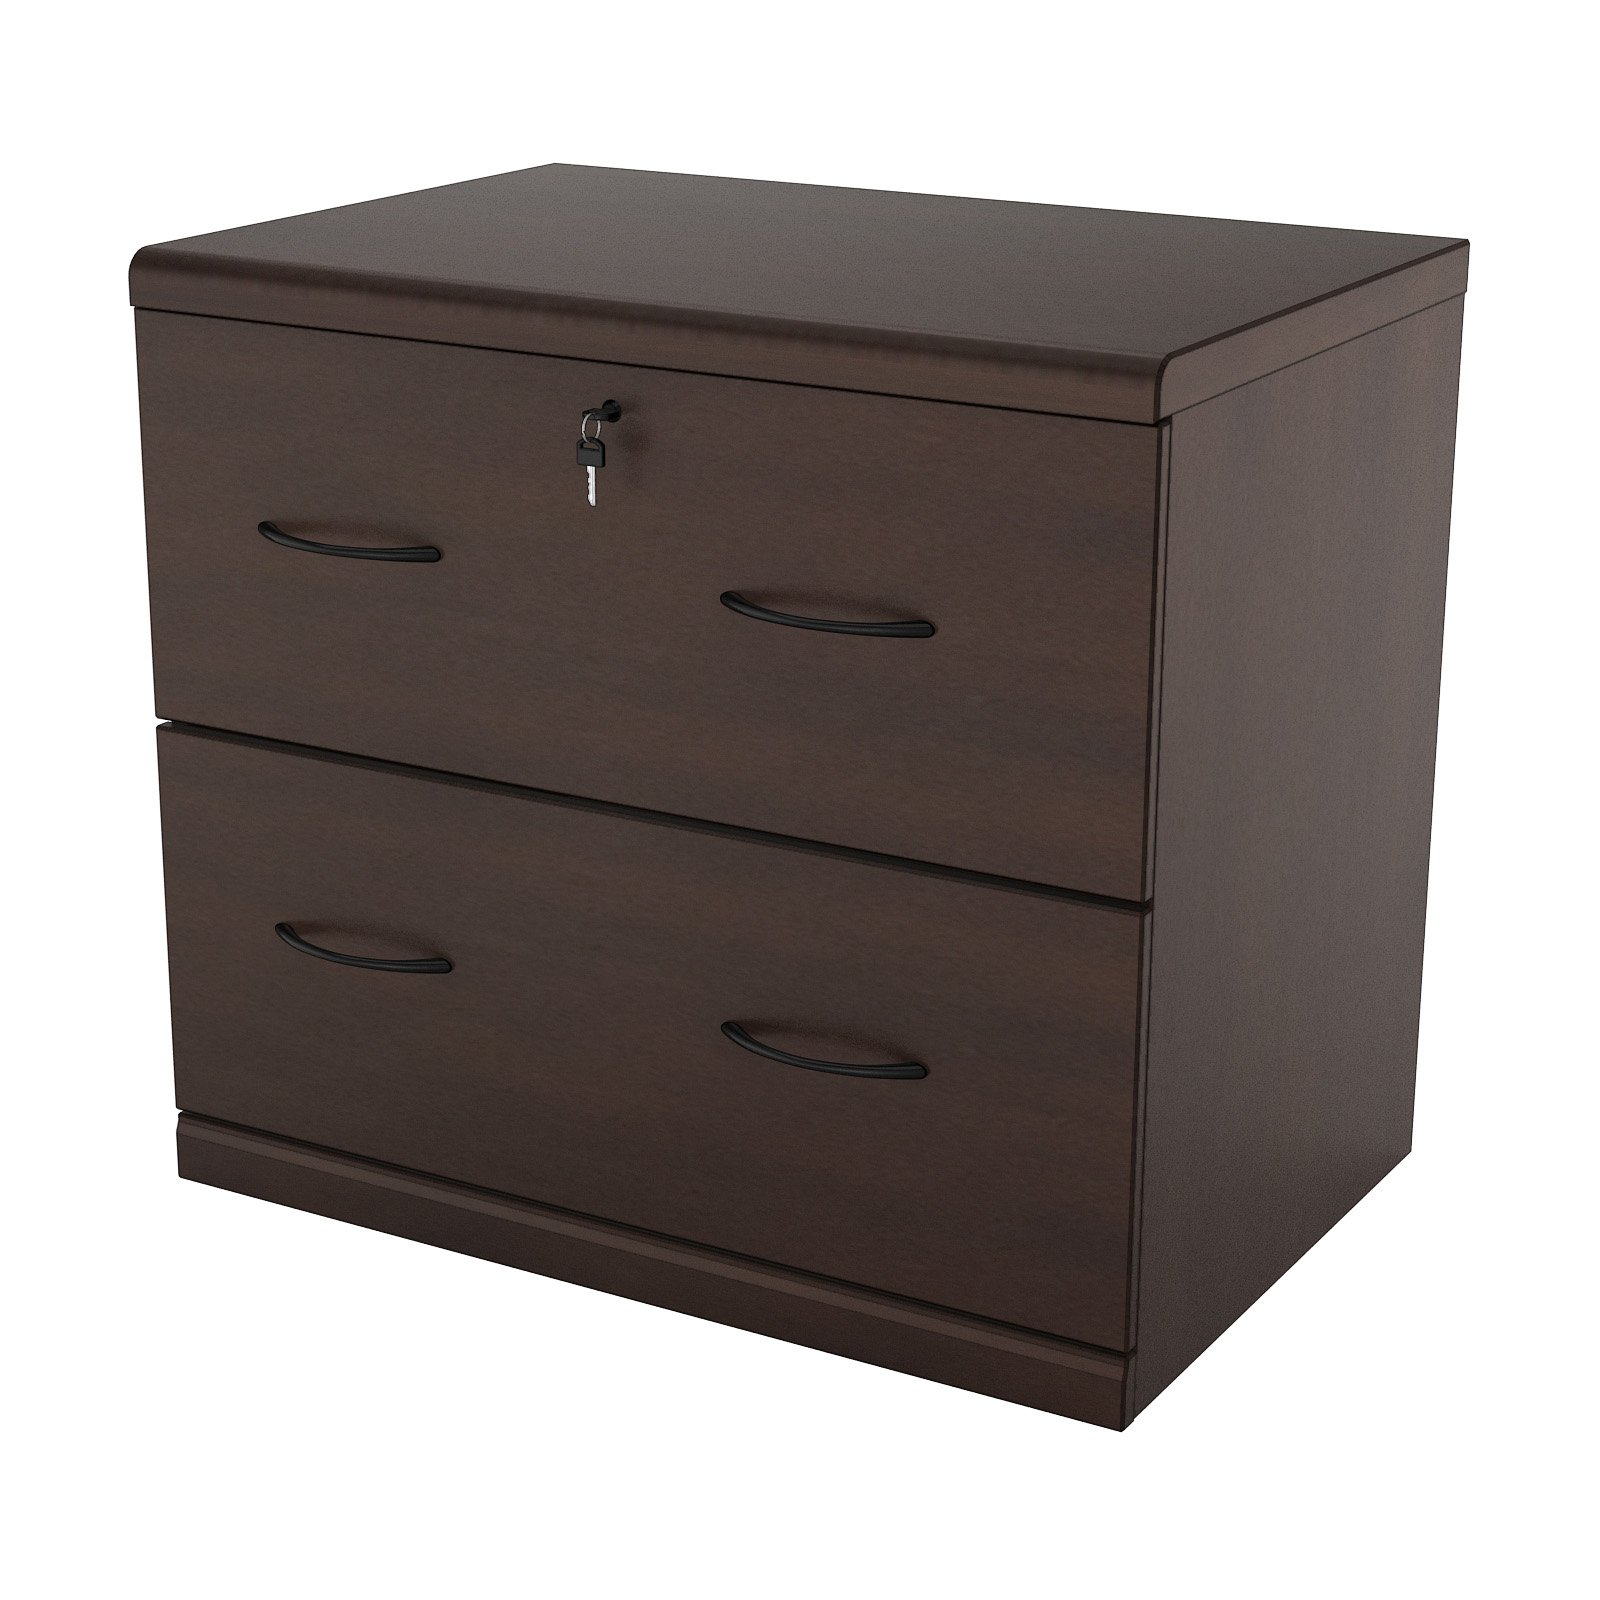 2 Drawer Lateral Wood Lockable Filing Cabinet Espresso Walmart with proportions 1600 X 1600